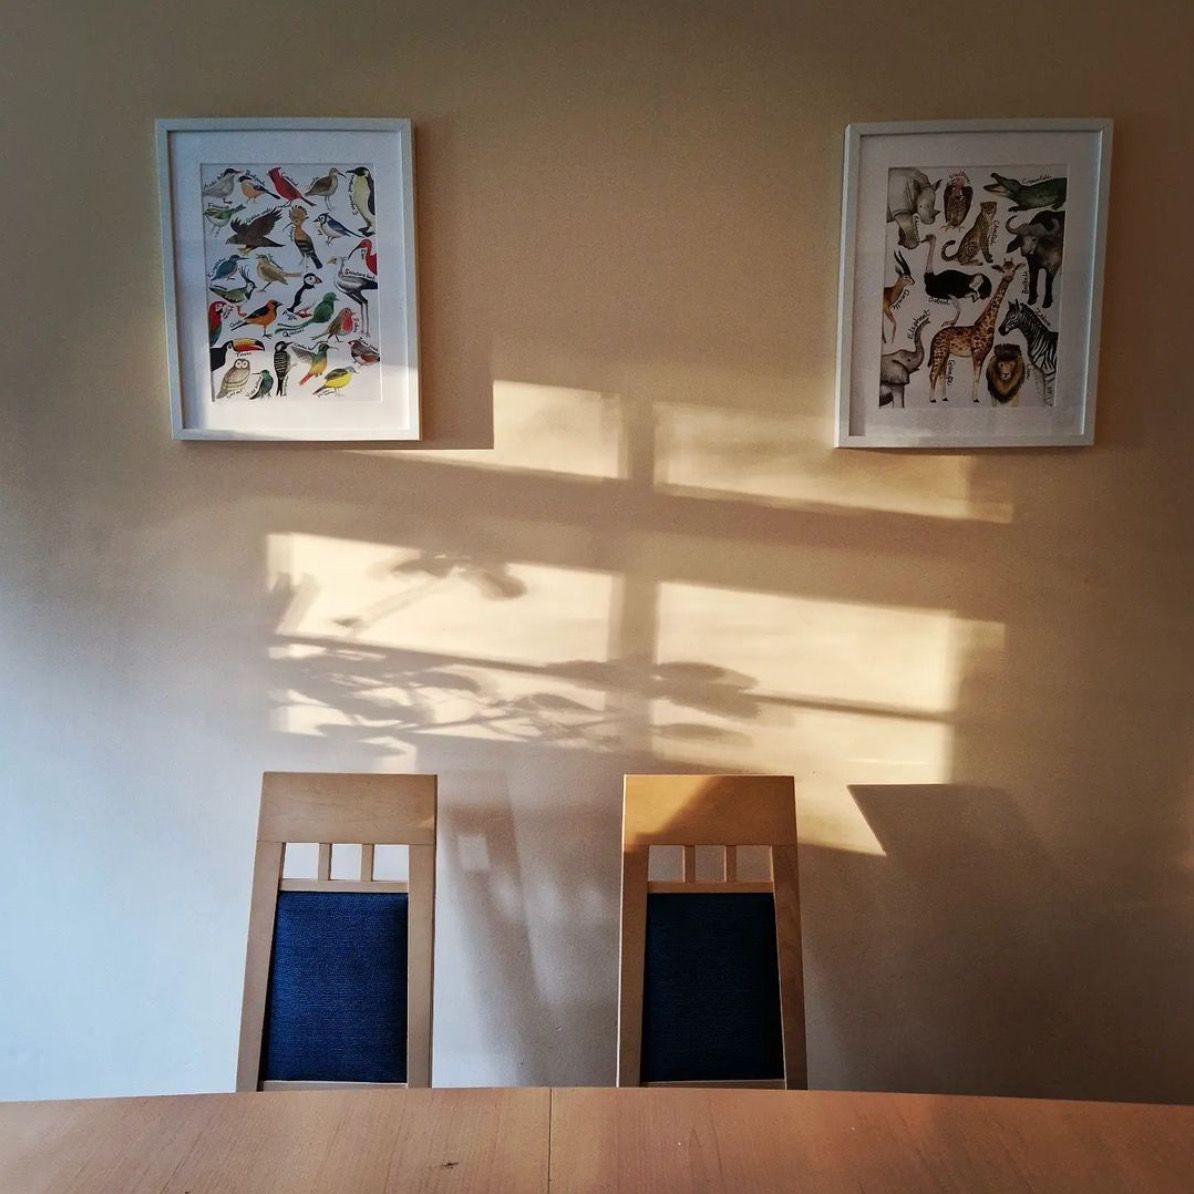 Plan shadows on a kitchen wall with two posters up with animals on them, and two dining chairs.